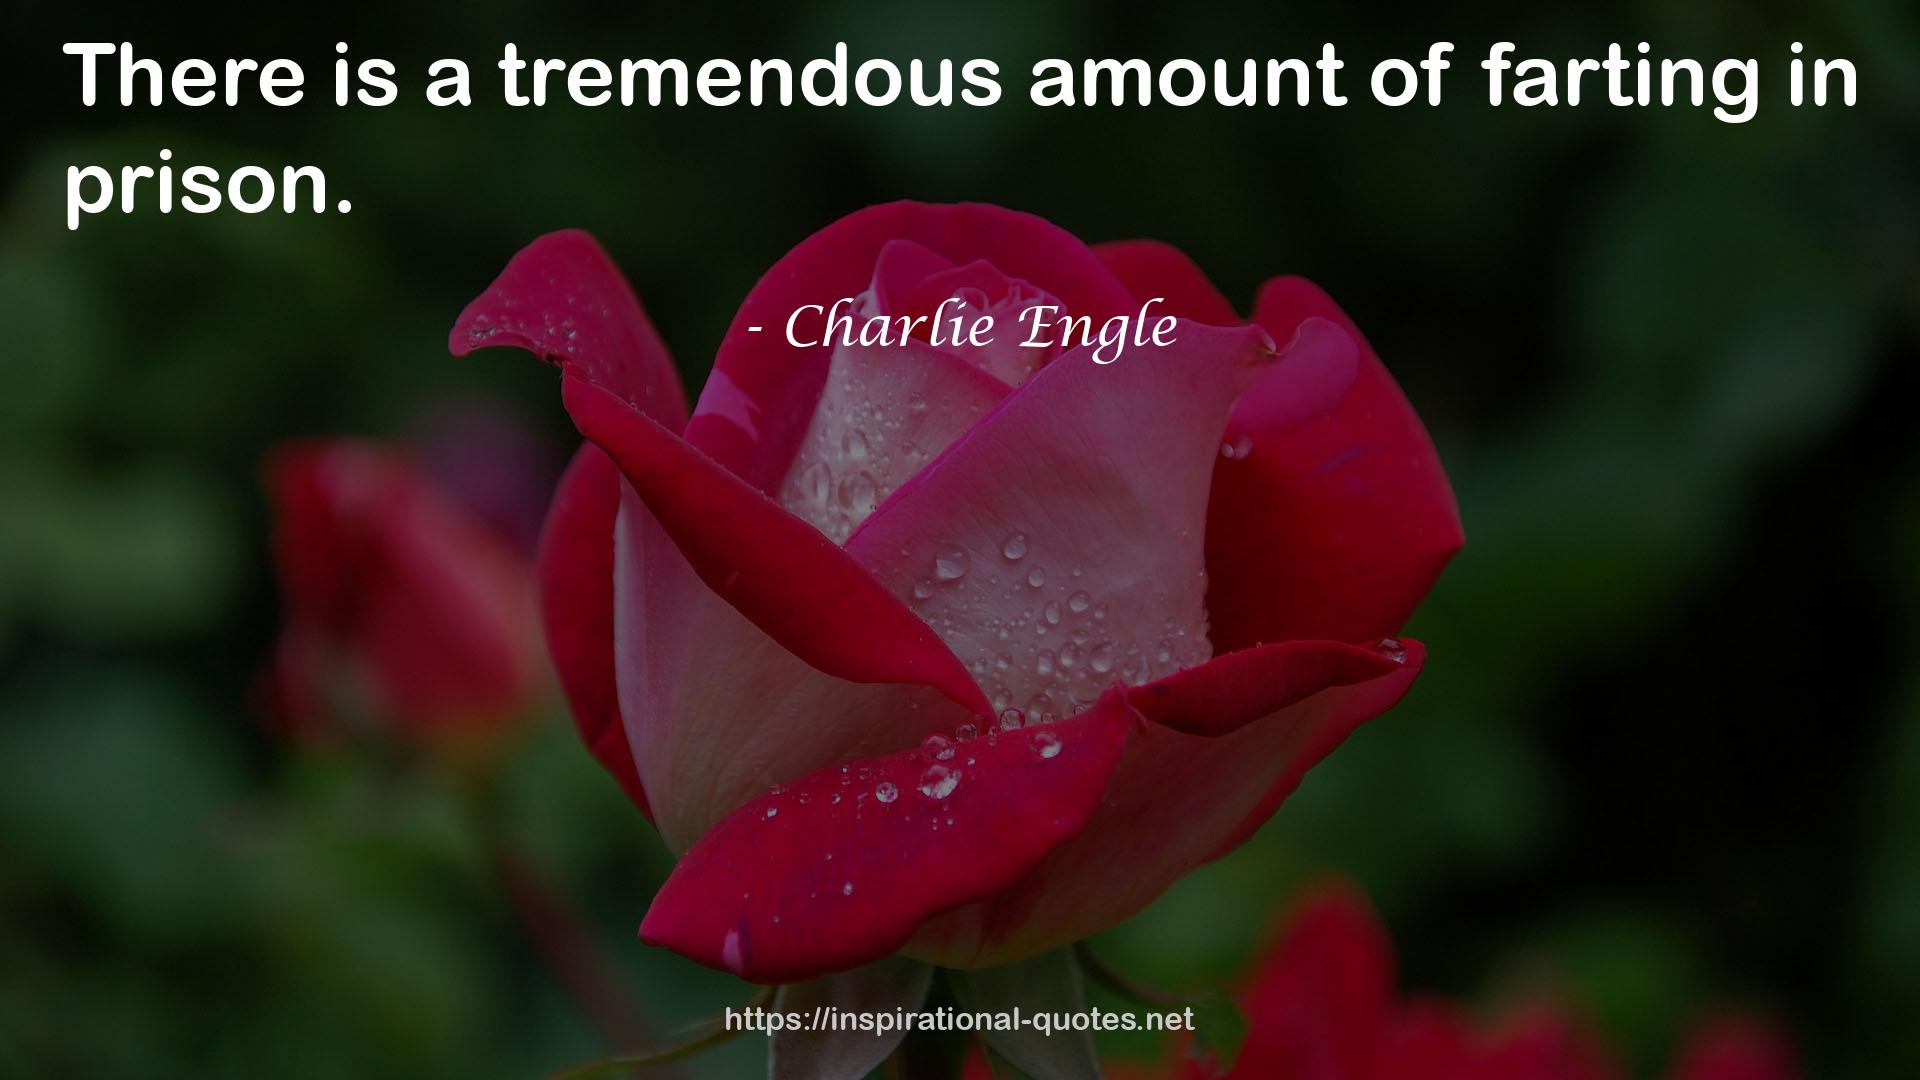 Charlie Engle QUOTES